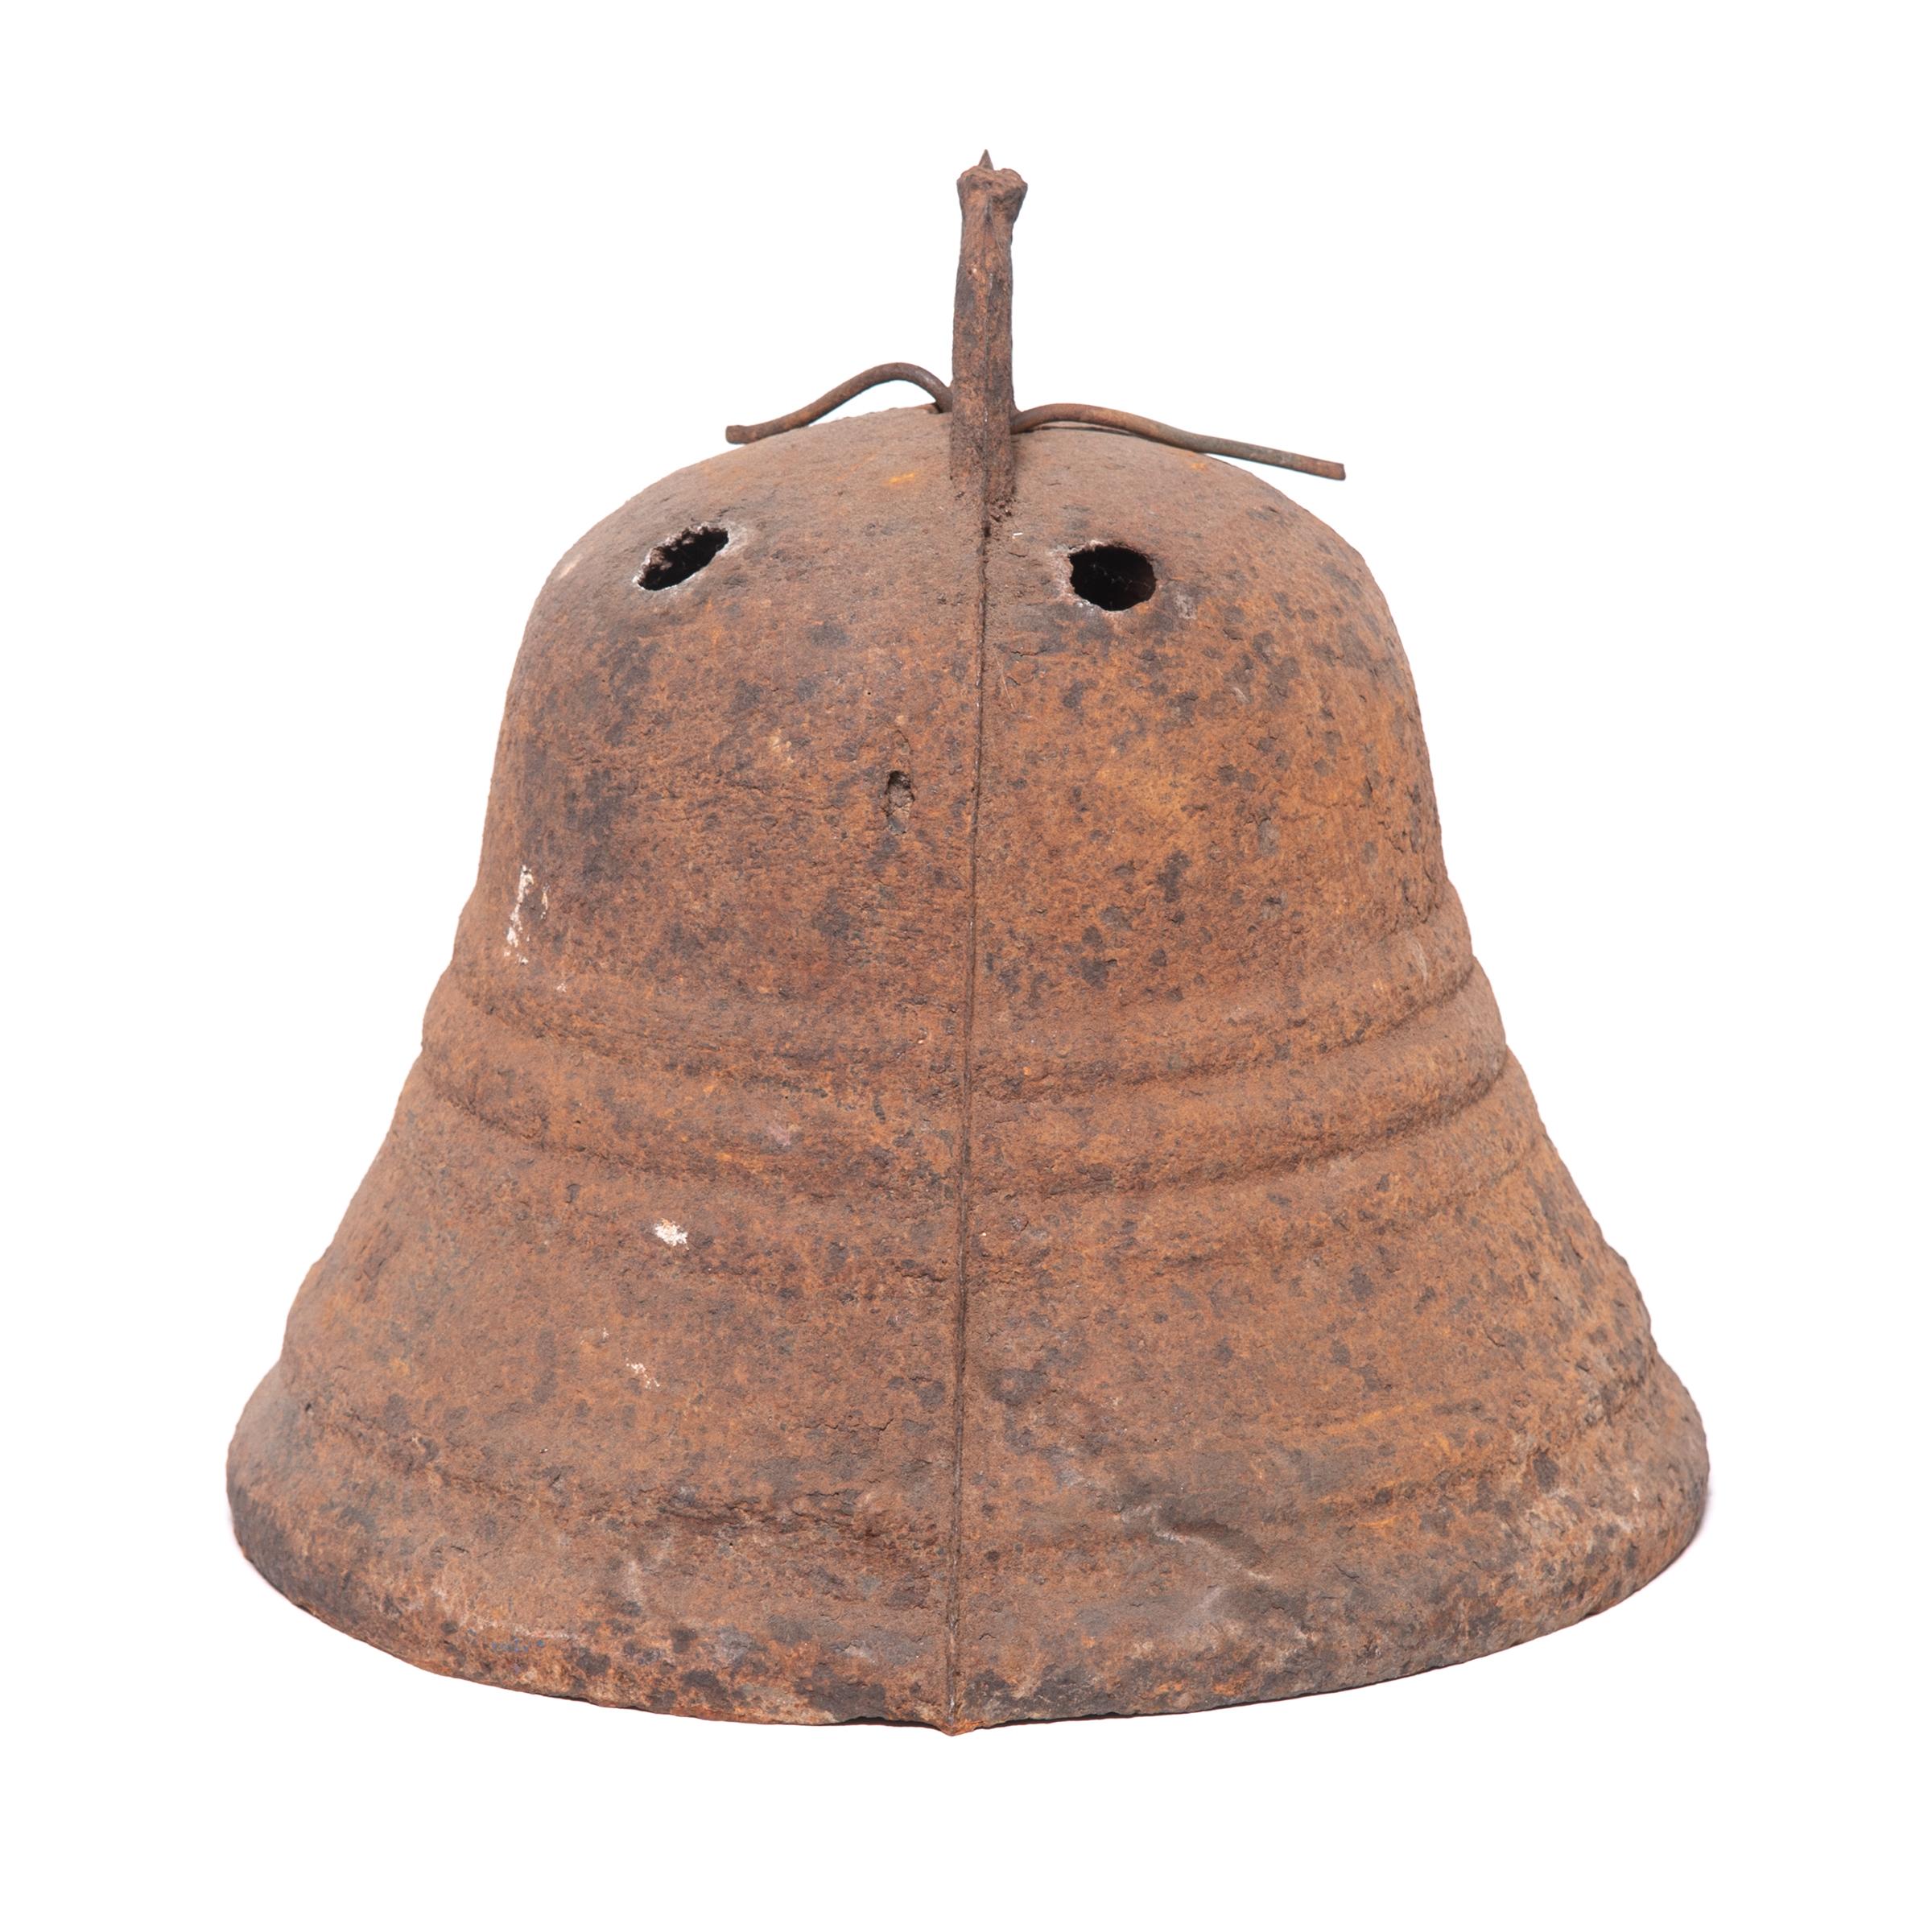 Qing Chinese Courtyard Bell with Clapper, c. 1850